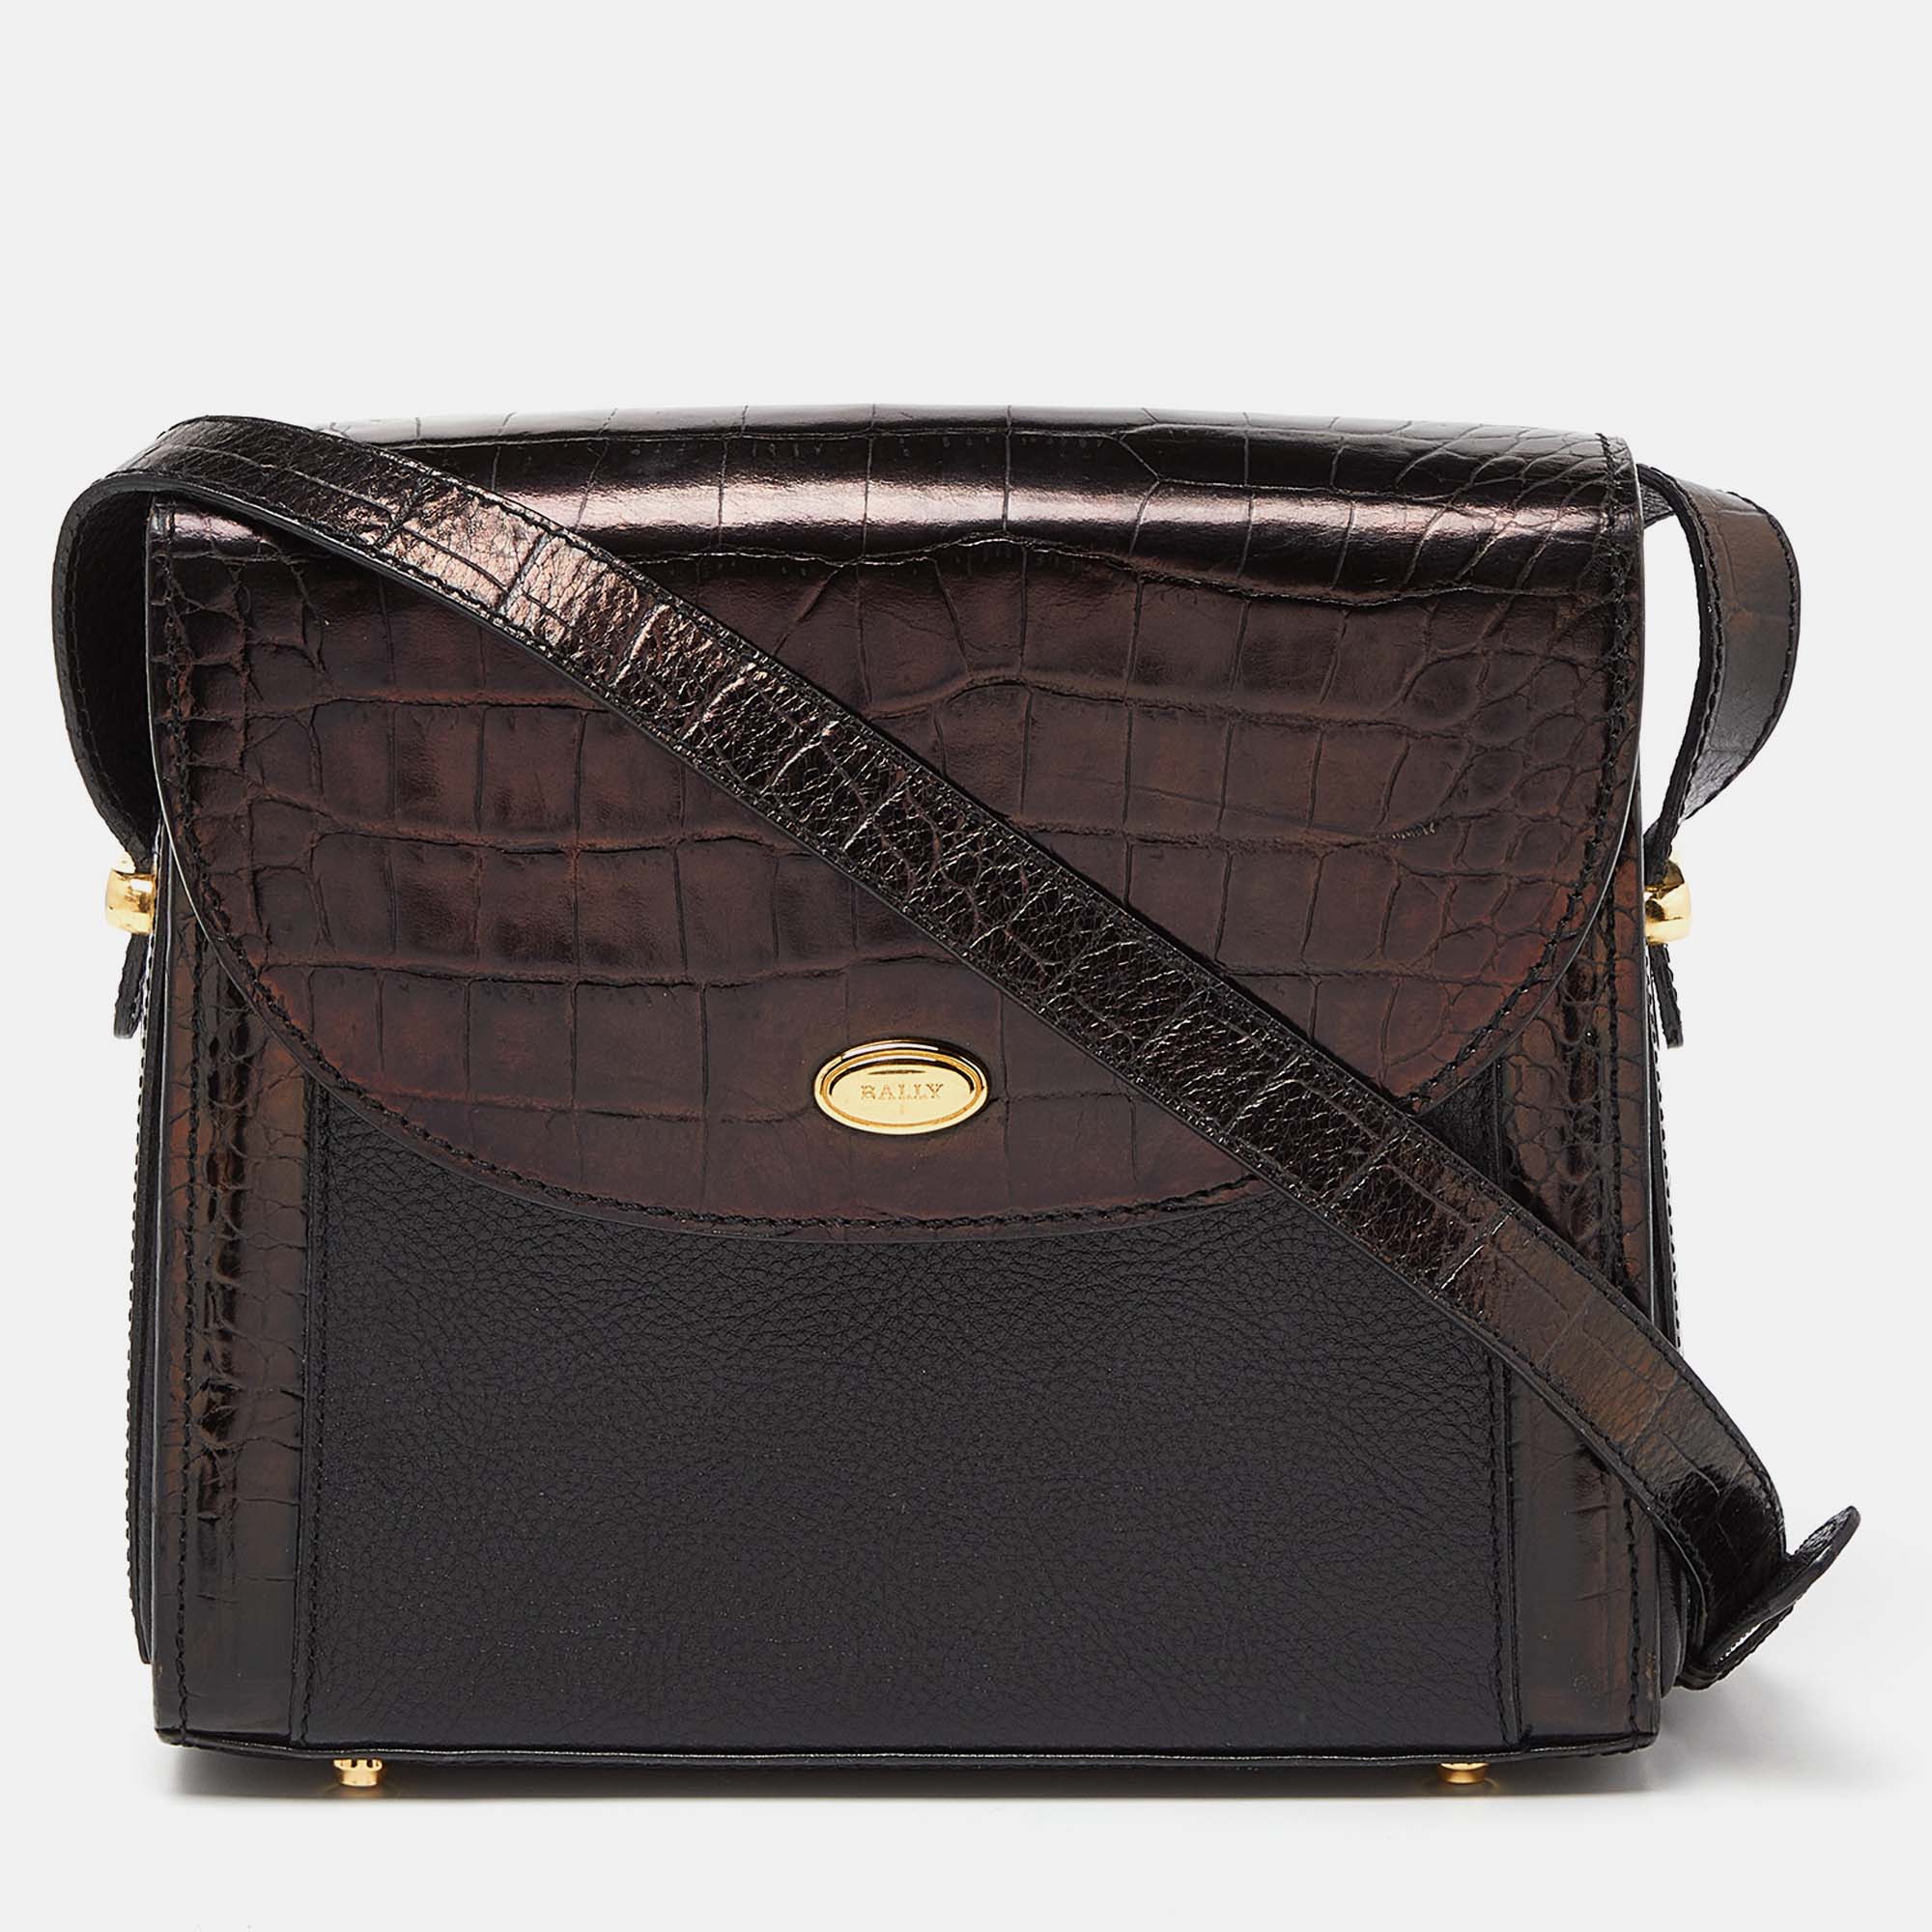 

Bally Black Leather and Croc Embossed Leather Vintage Flap Crossbody Bag